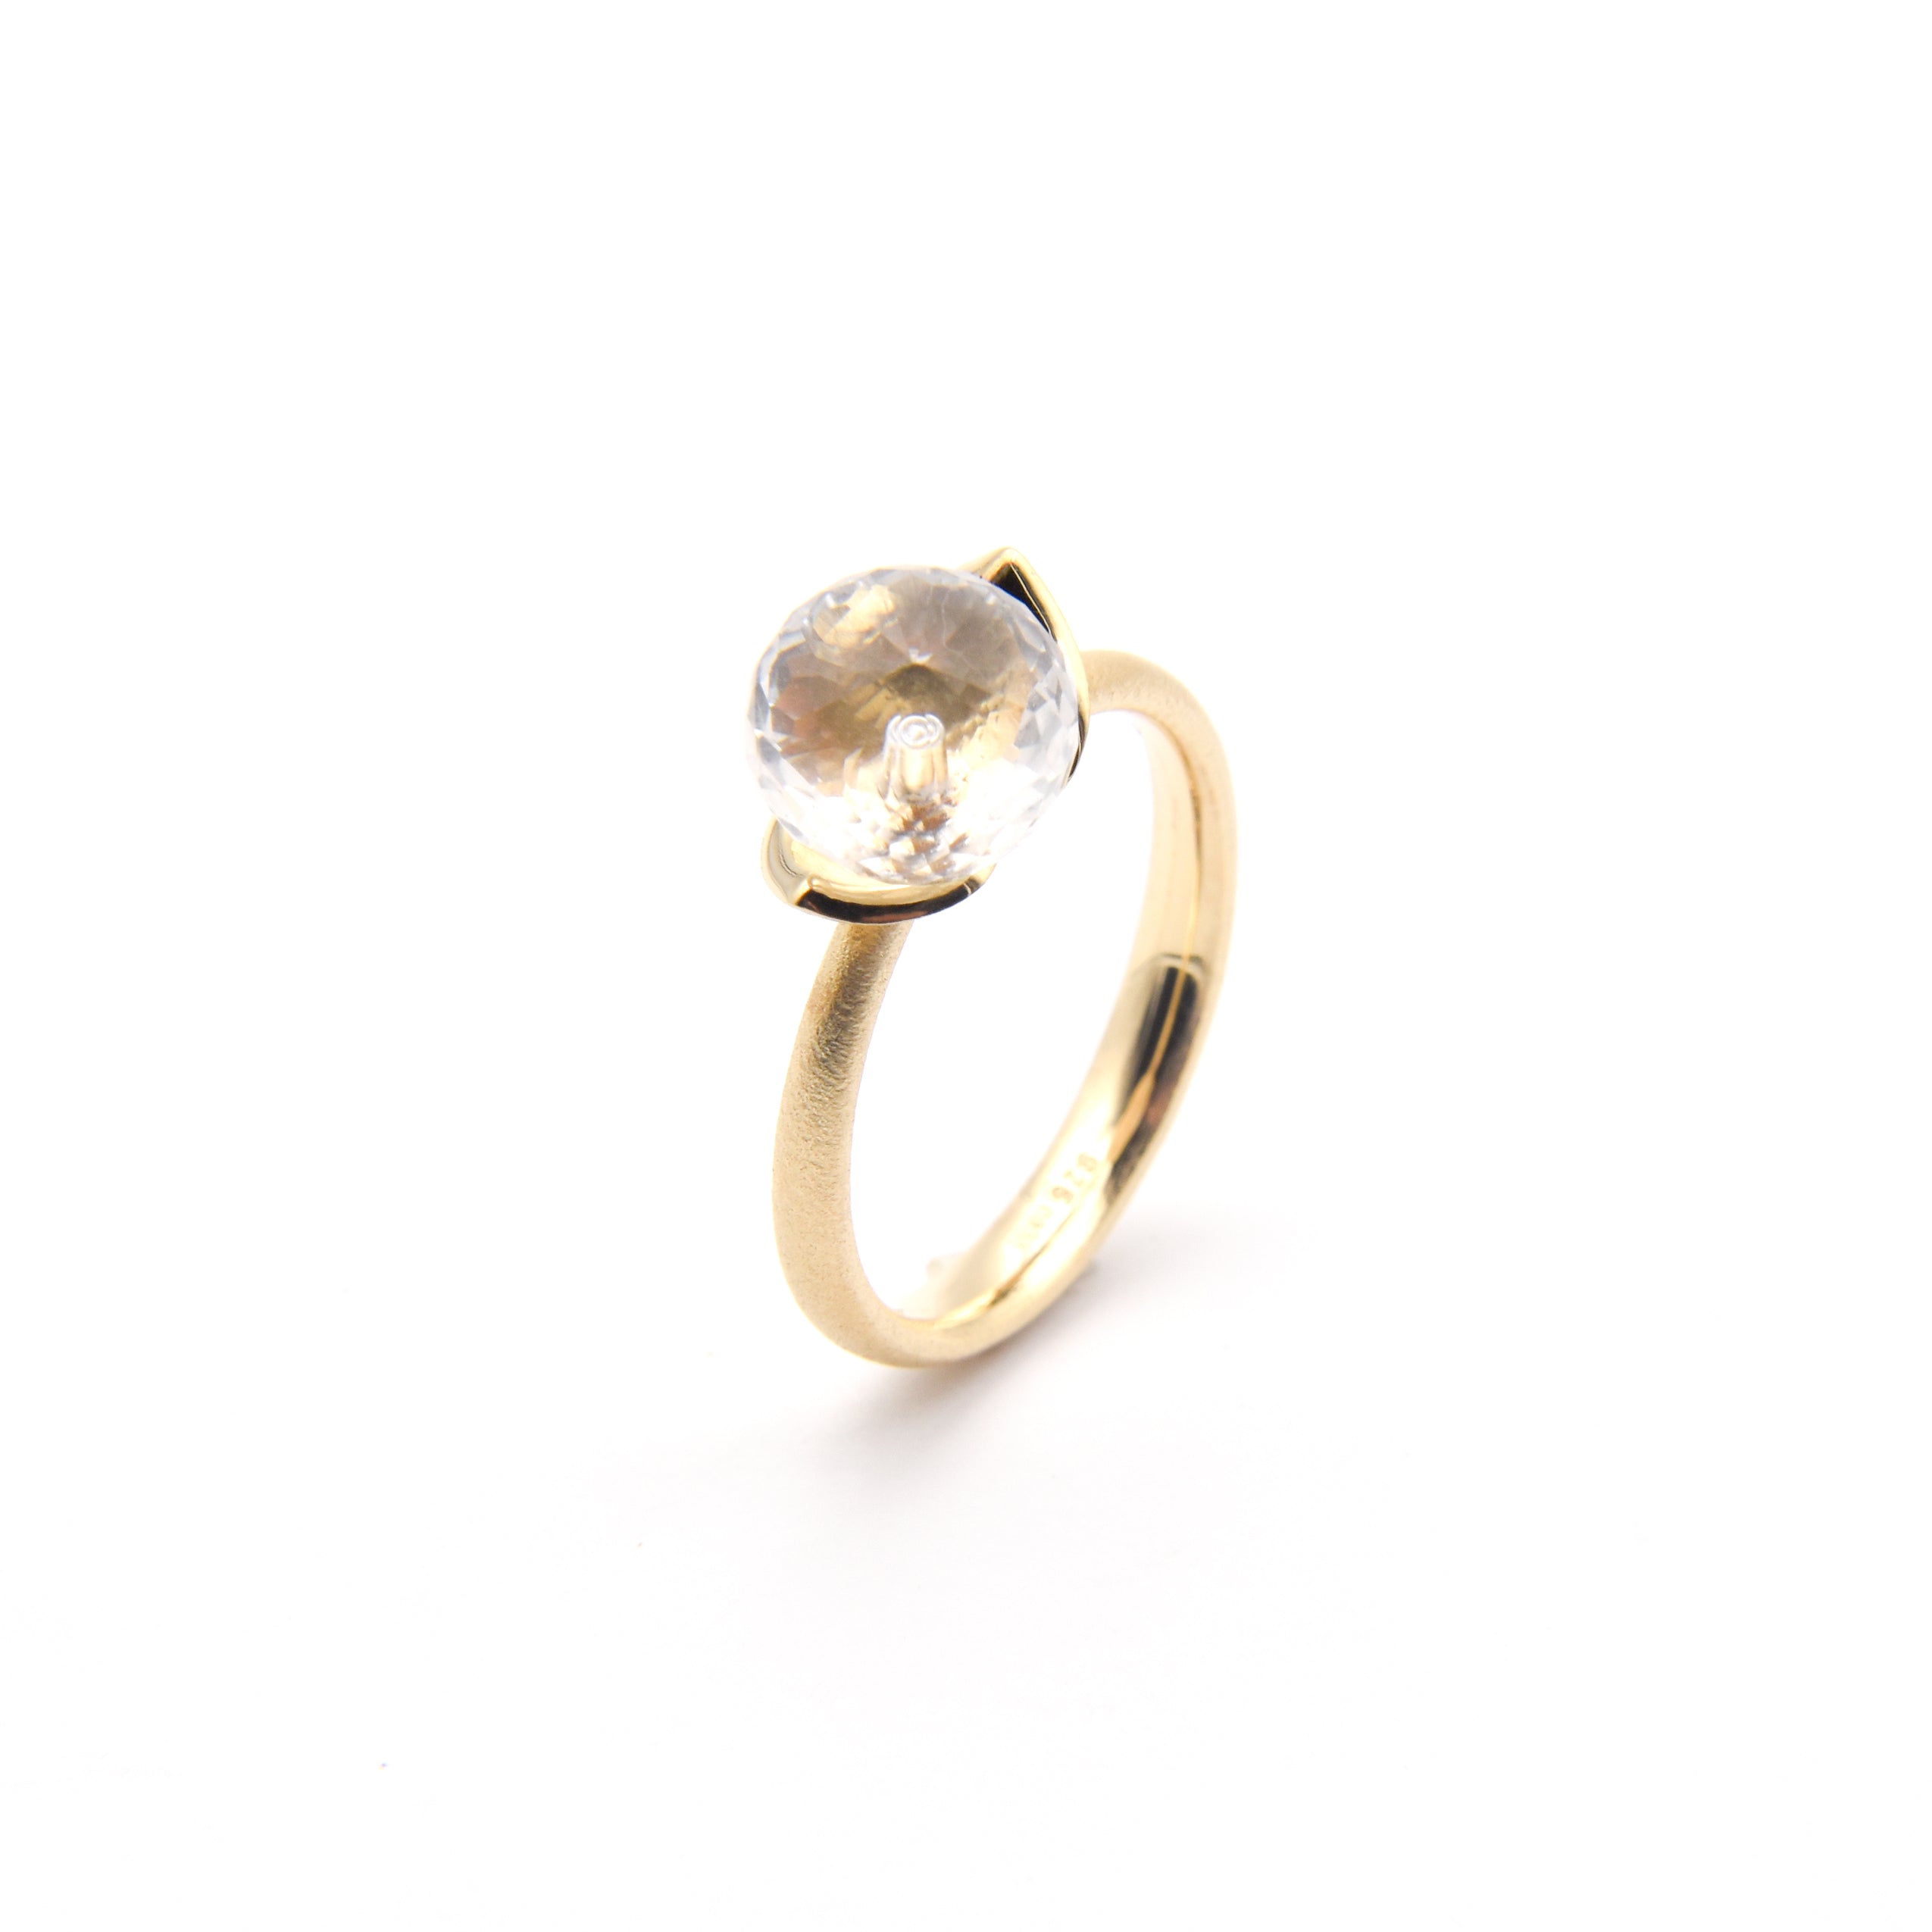 Dolce ring "smal" with rock crystal 925/-